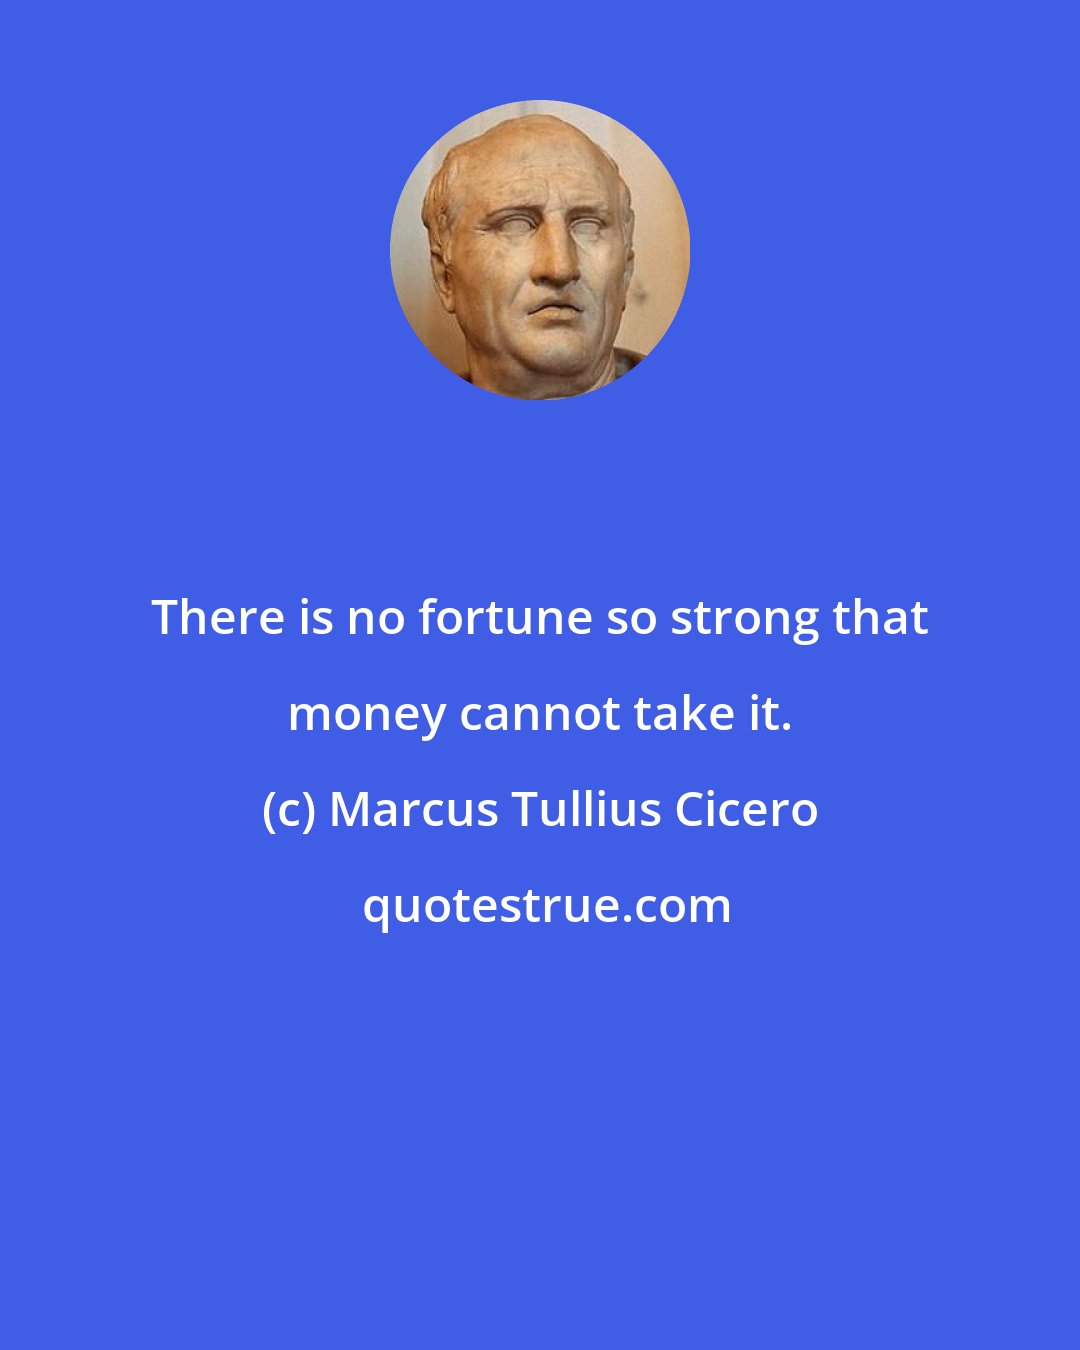 Marcus Tullius Cicero: There is no fortune so strong that money cannot take it.